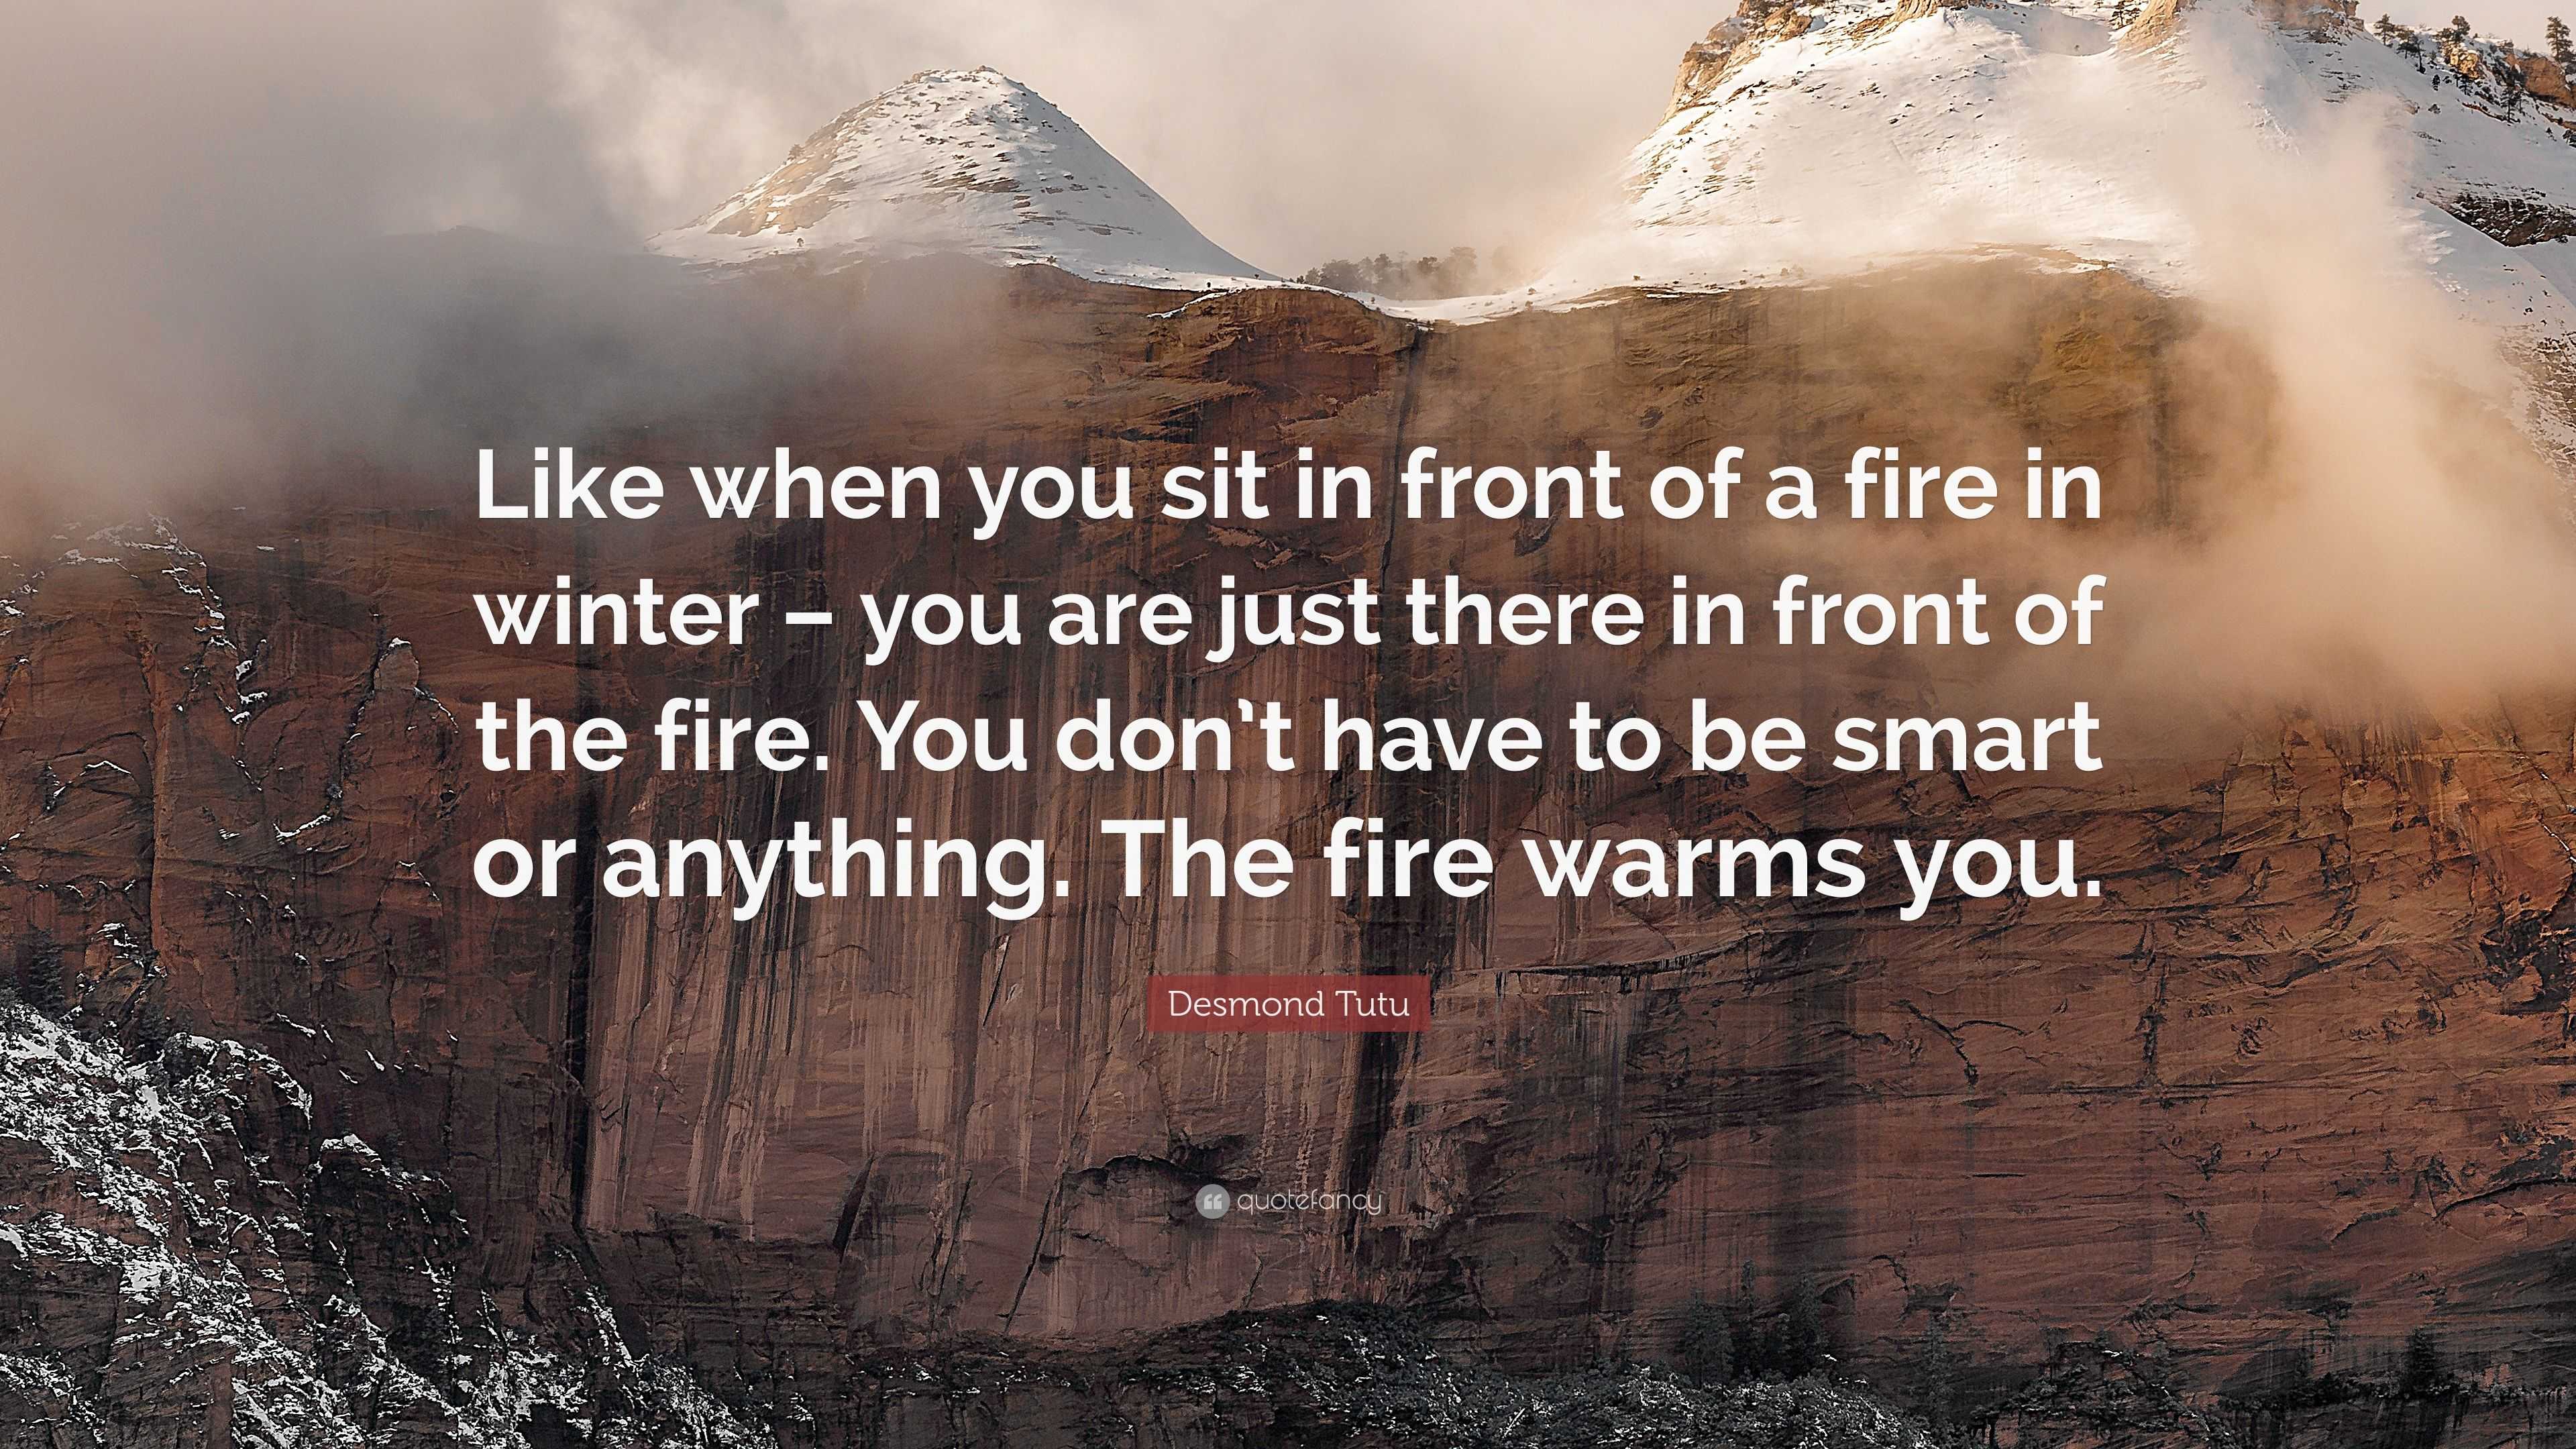 Desmond Tutu Quote “Like when you sit in front of a fire in winter